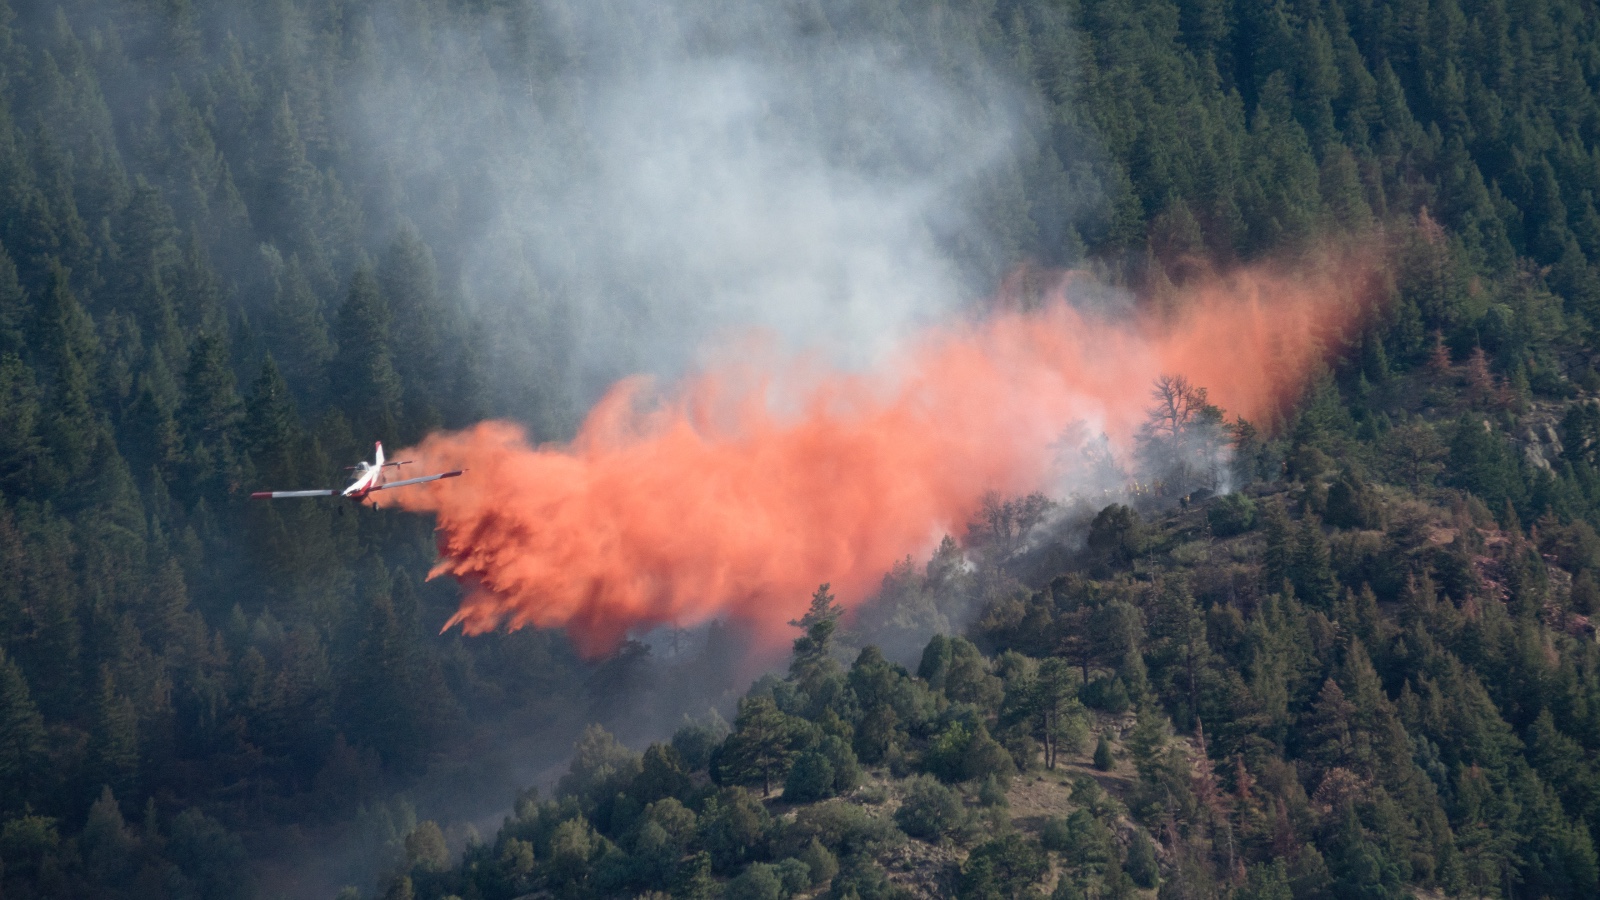 A low-flying plane drops fire retardant on a wildfire in Colorado